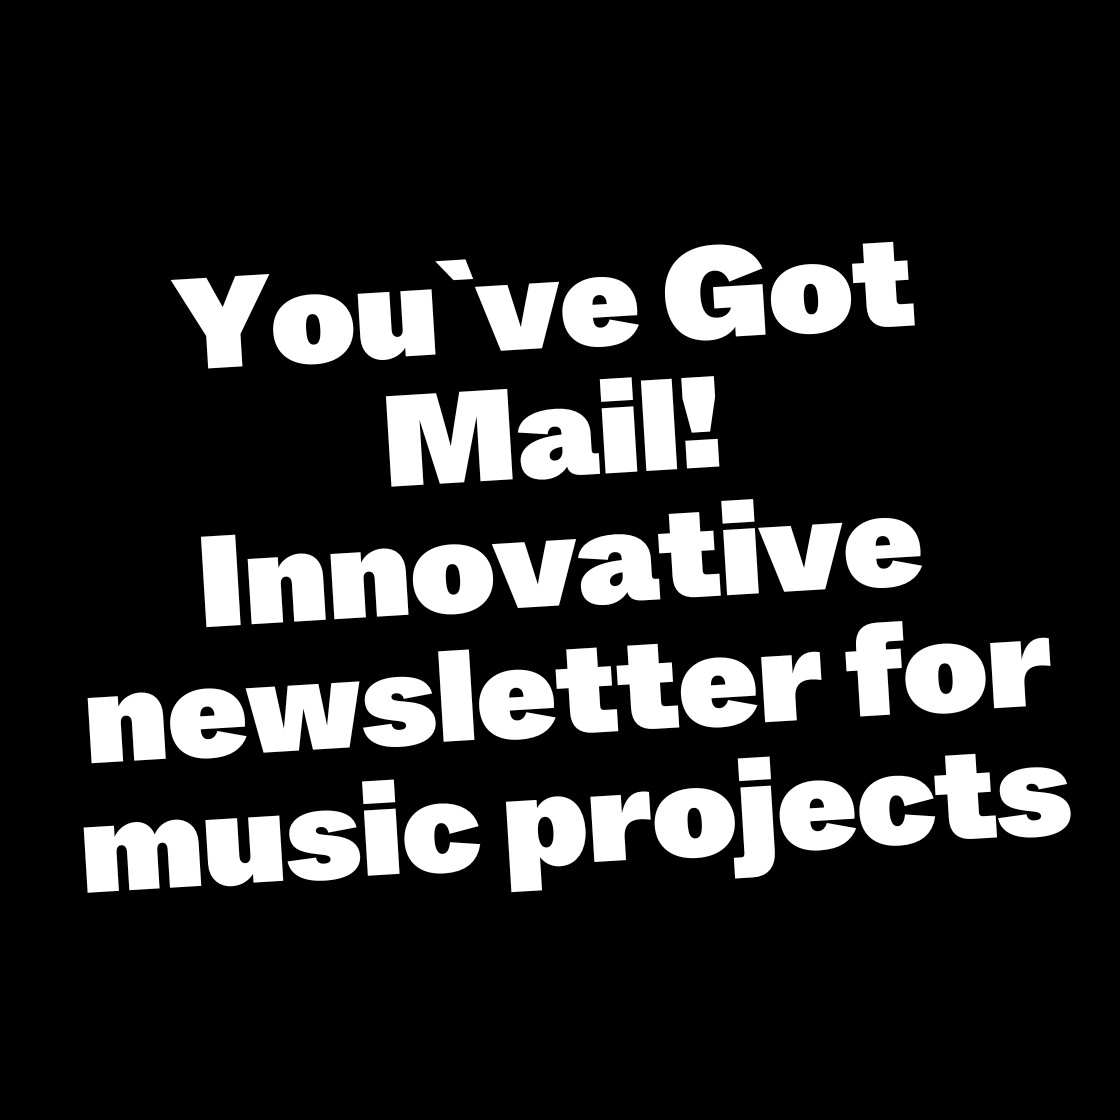 You've Got Mail! Innovative Newsletter for music projects